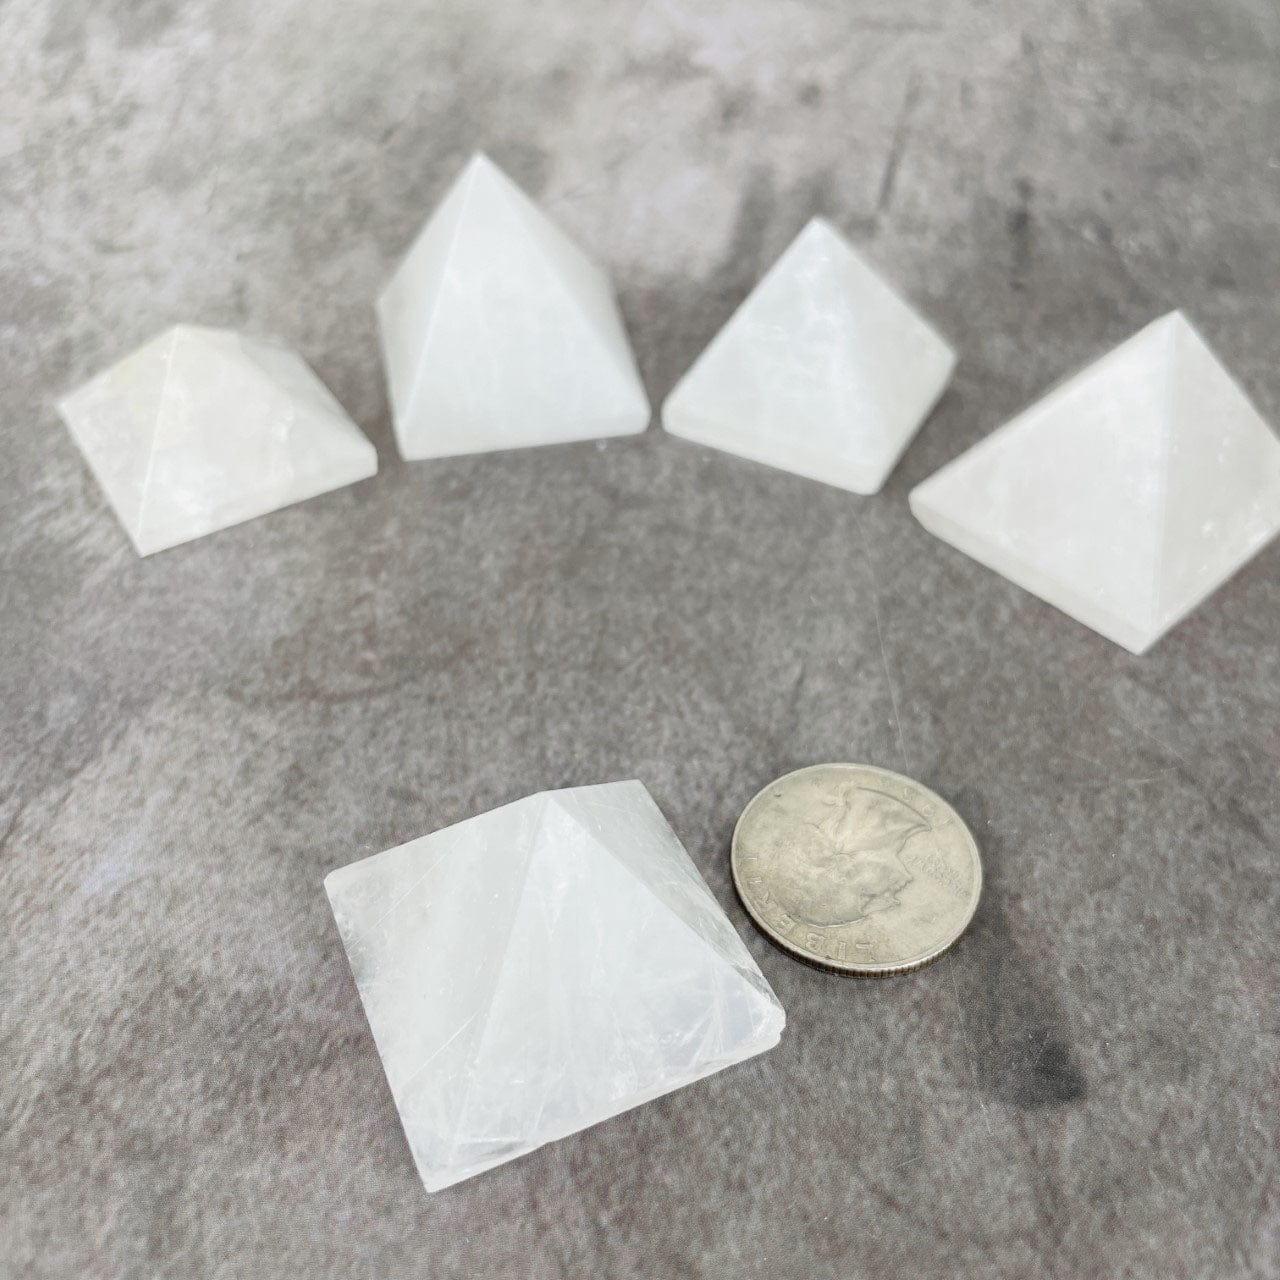 5 Crystal Quartz Pyramids 1.25" size with one  in front next to aaa qurter for size reference